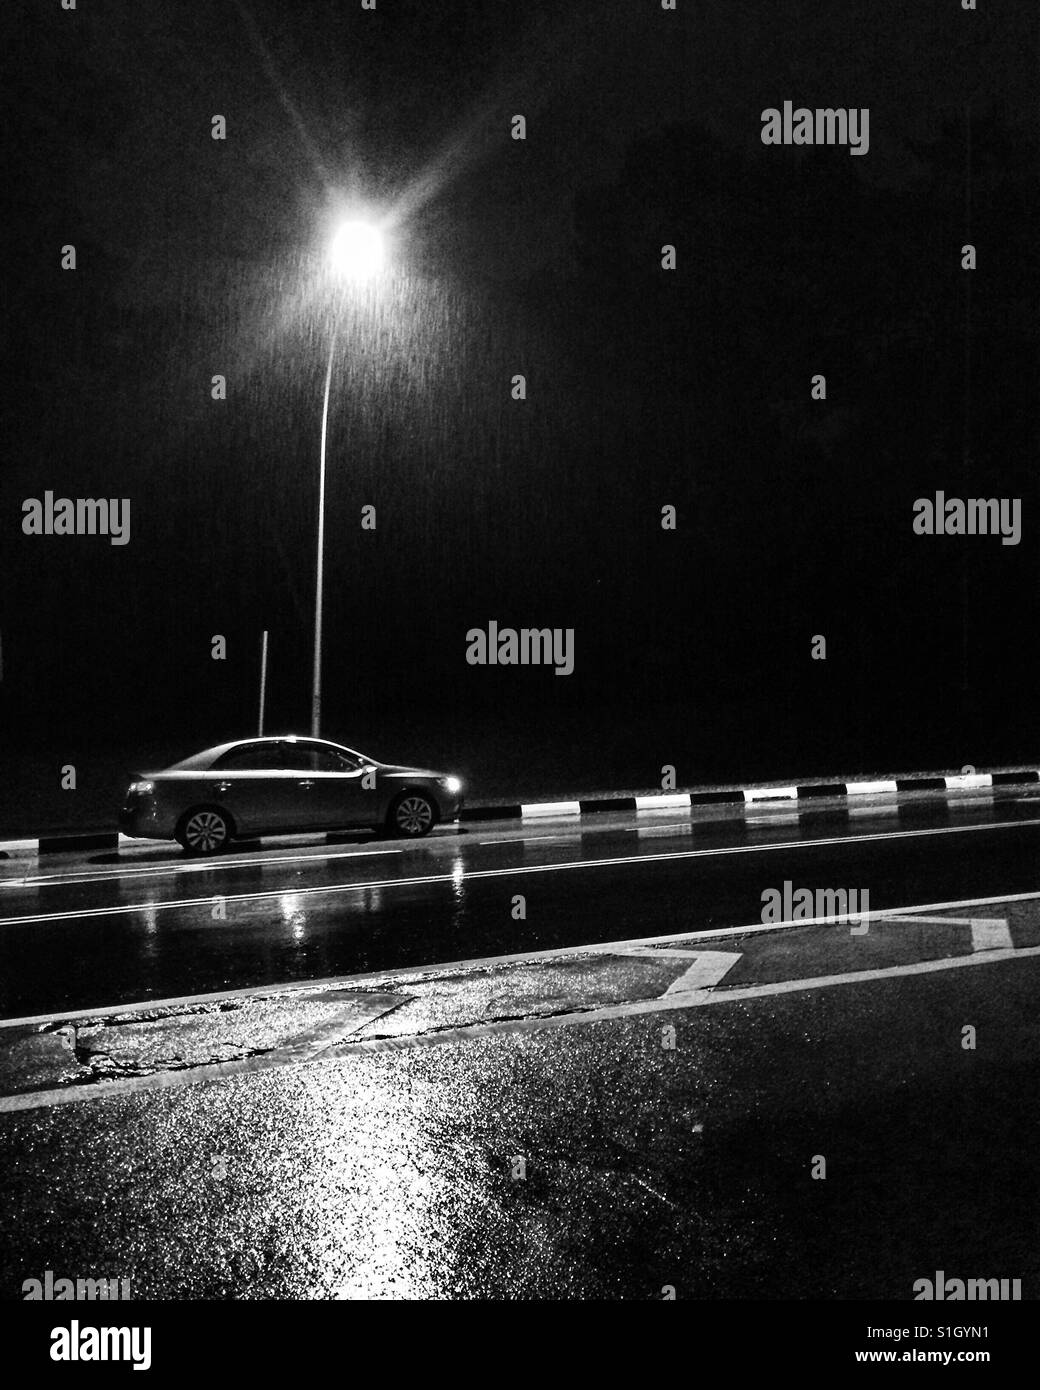 Black and white photo of a car under a street light. Stock Photo